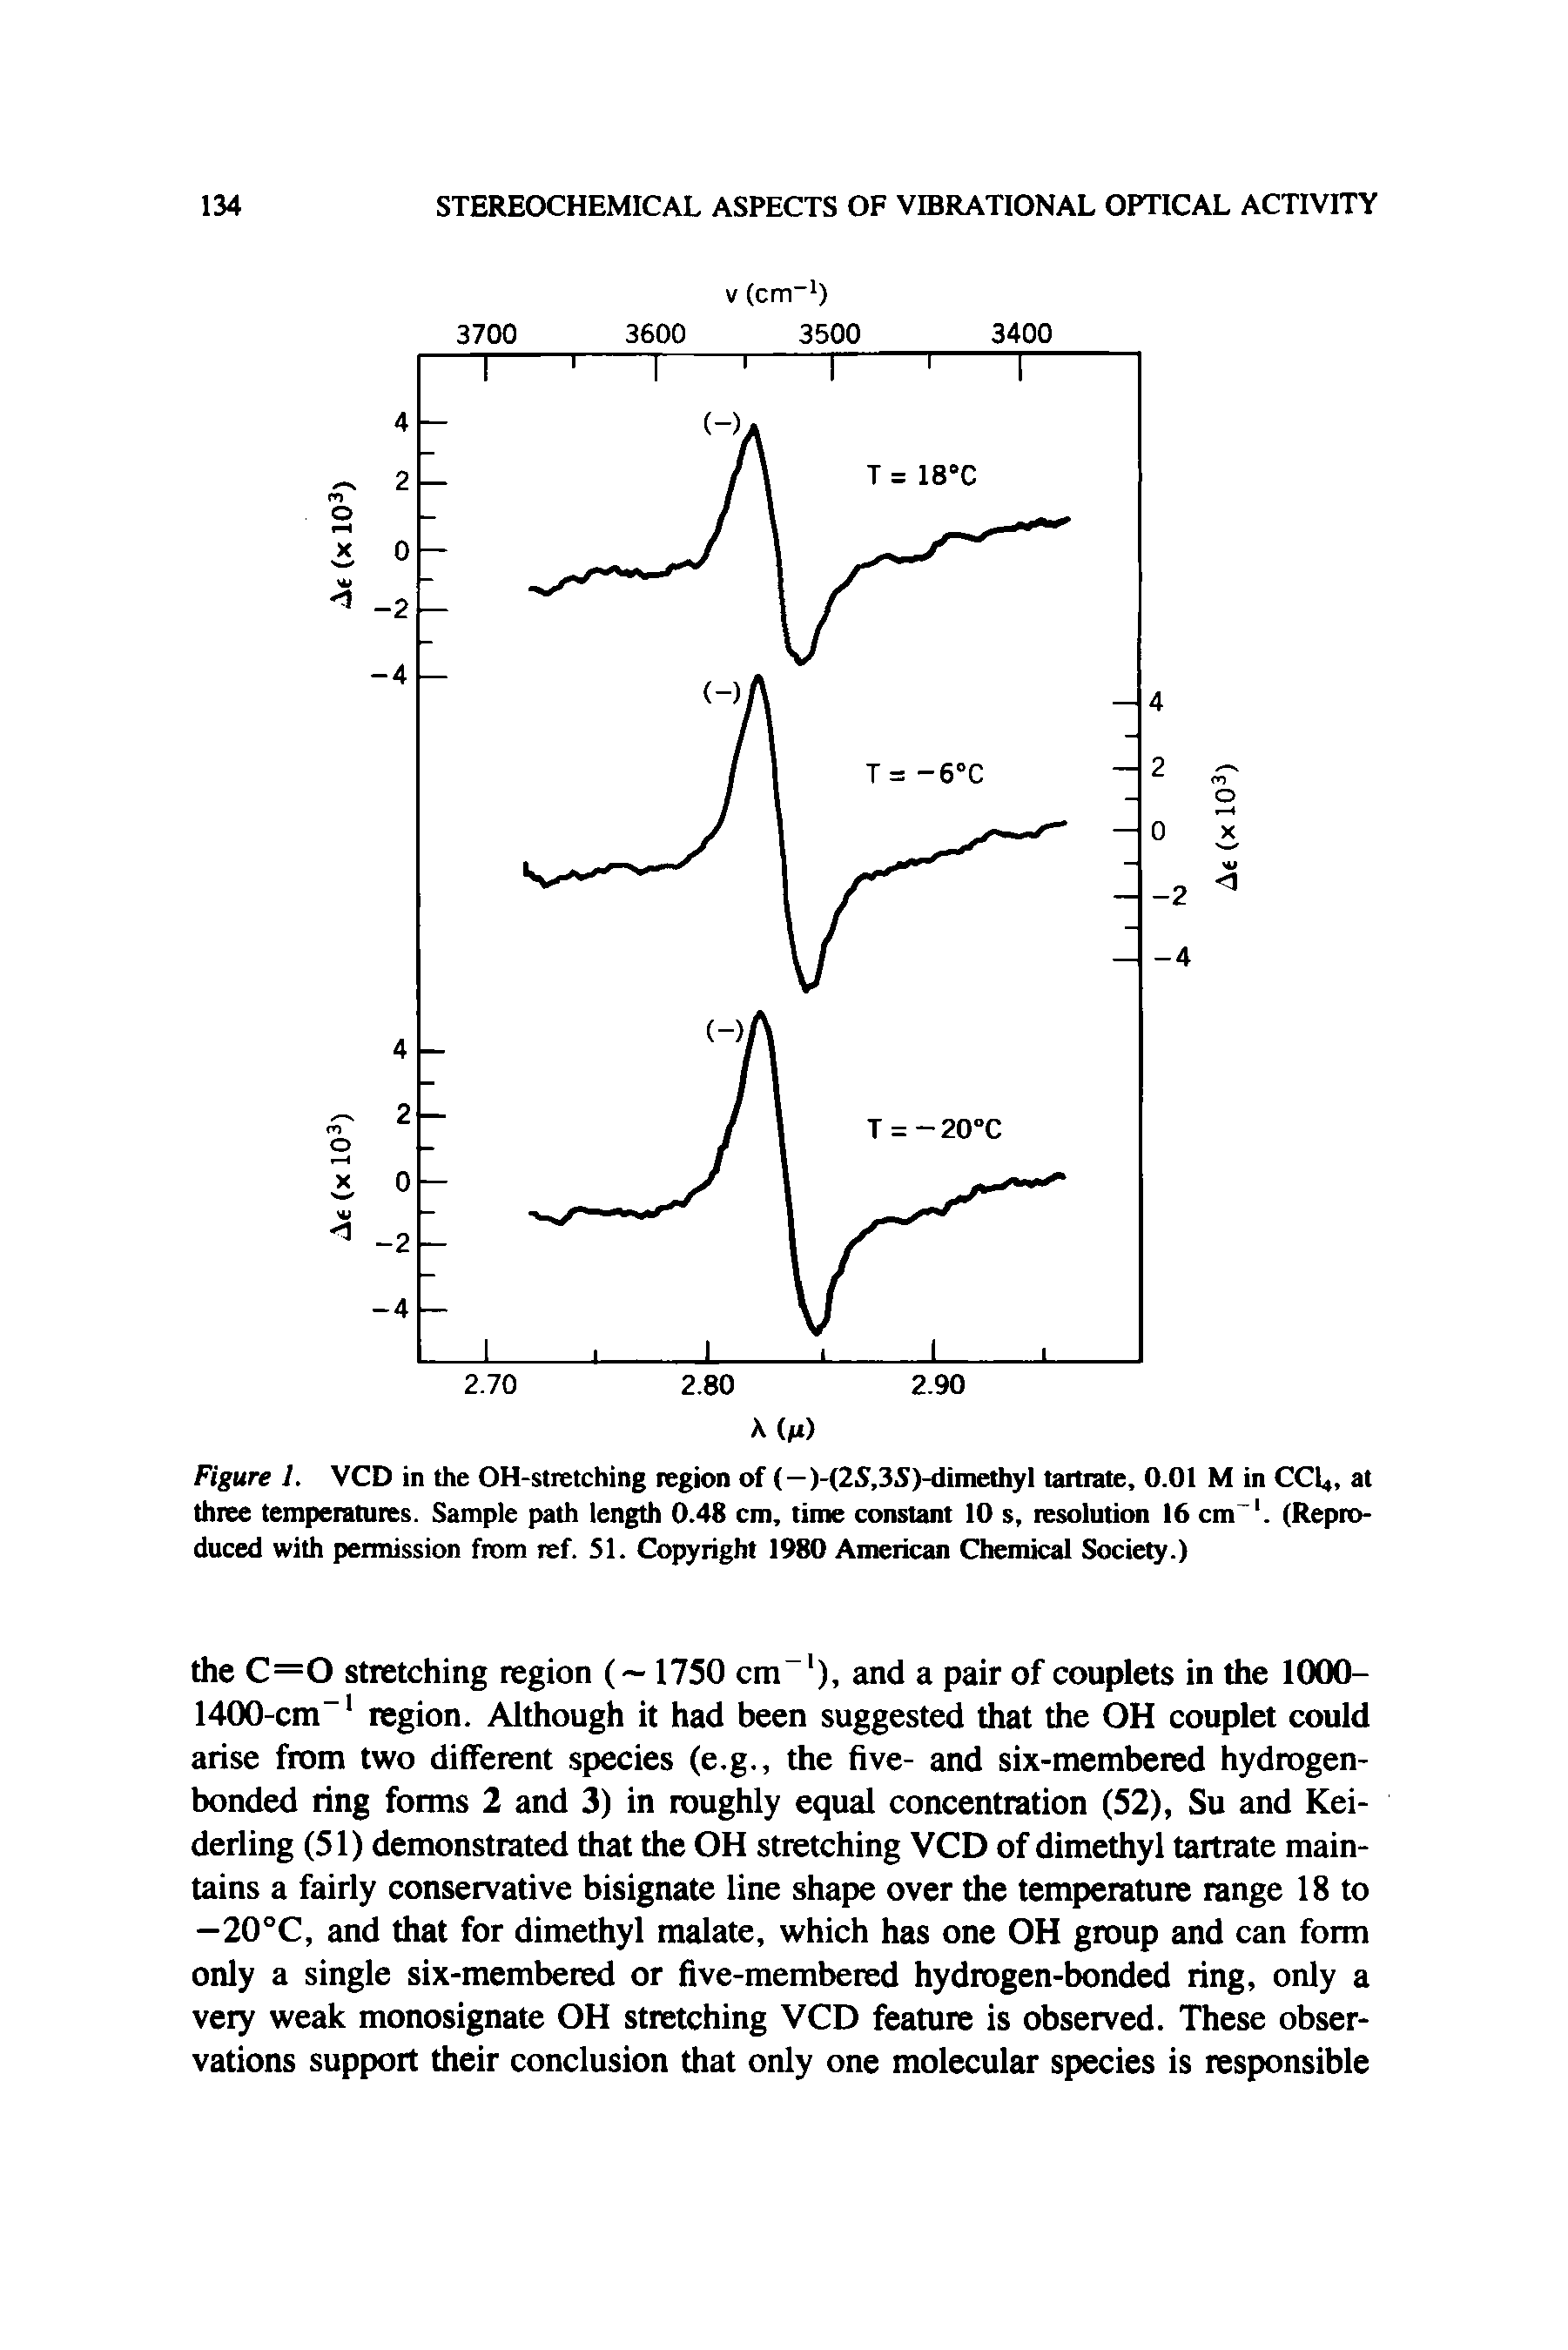 Figure 1. VCD in the OH-stretching region of (—)-(2S,3S)-dimethyl tartrate, 0.01 M in CCl, at three temperatures. Sample path length 0.48 cm, time constant 10 s, resolution 16 cm. (Reproduced with permission from ref. 51. Copyright 1980 American Chemical Society.)...